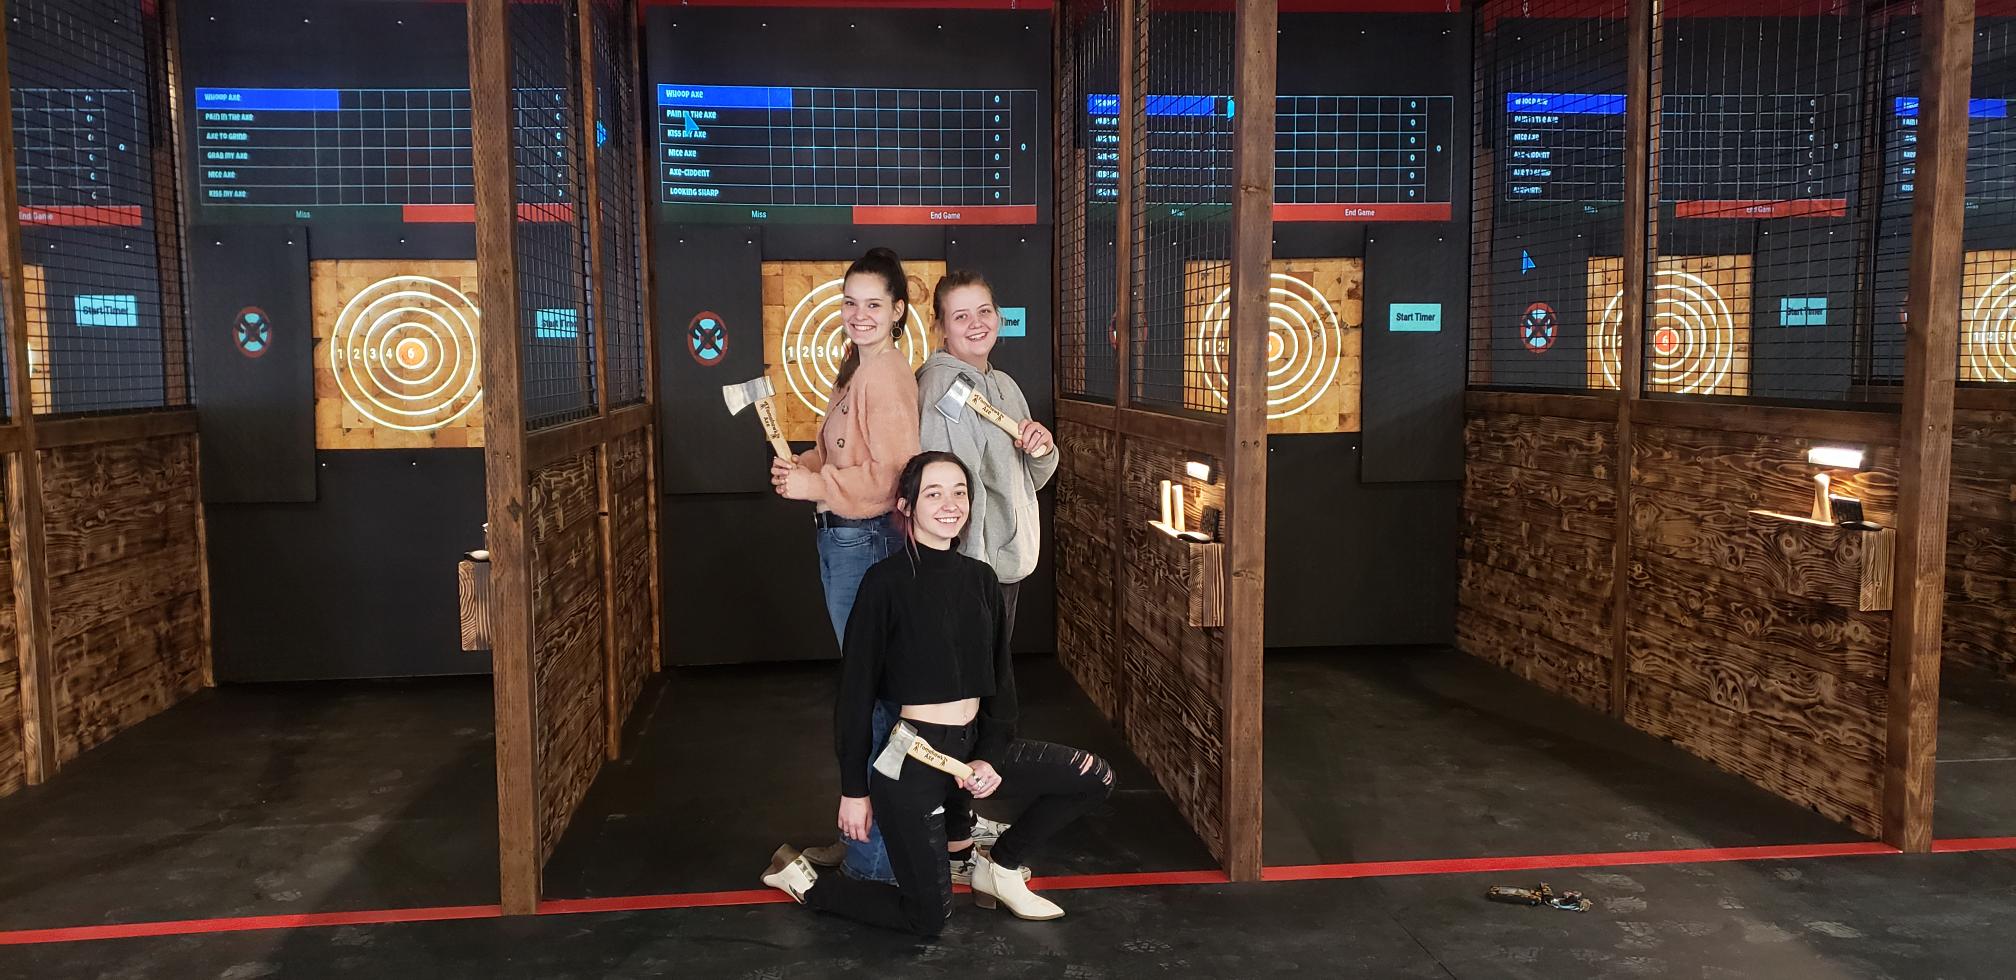 Marysville axe throwing women in front of projected target